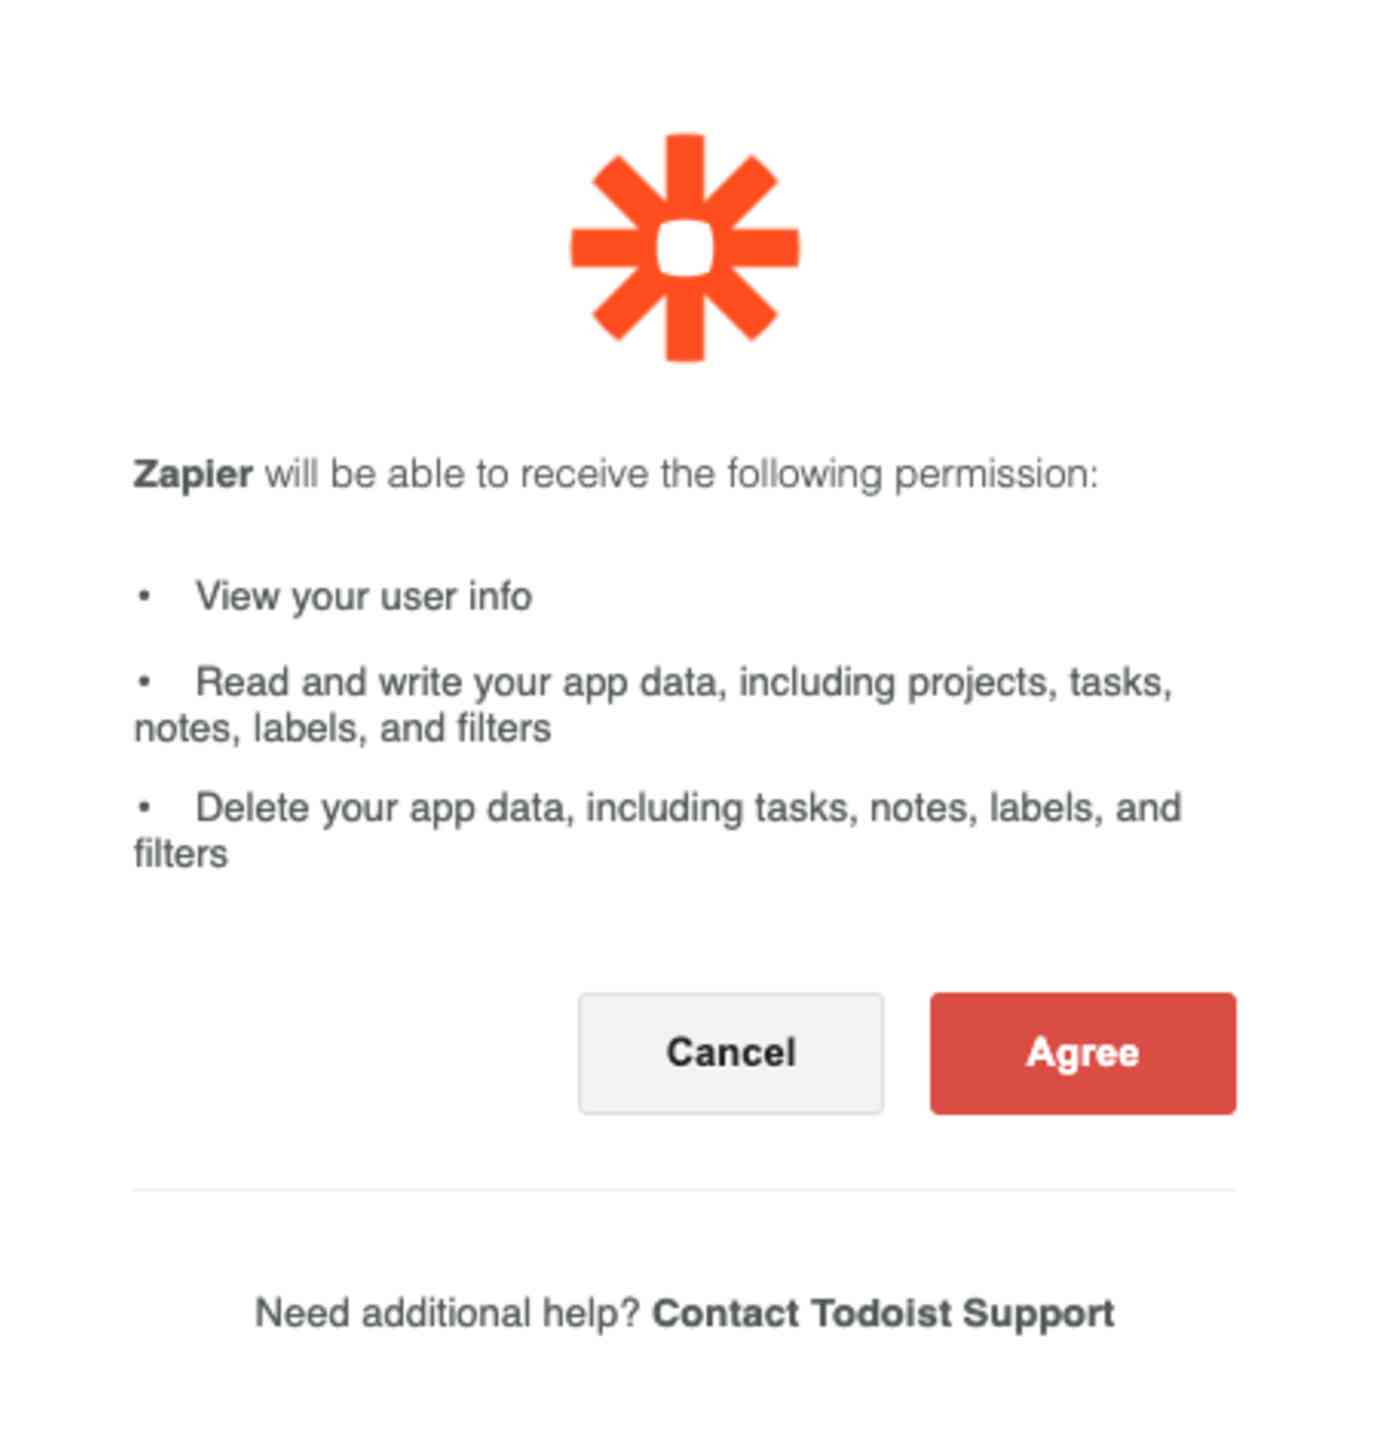 Todoist request for permission for Zapier